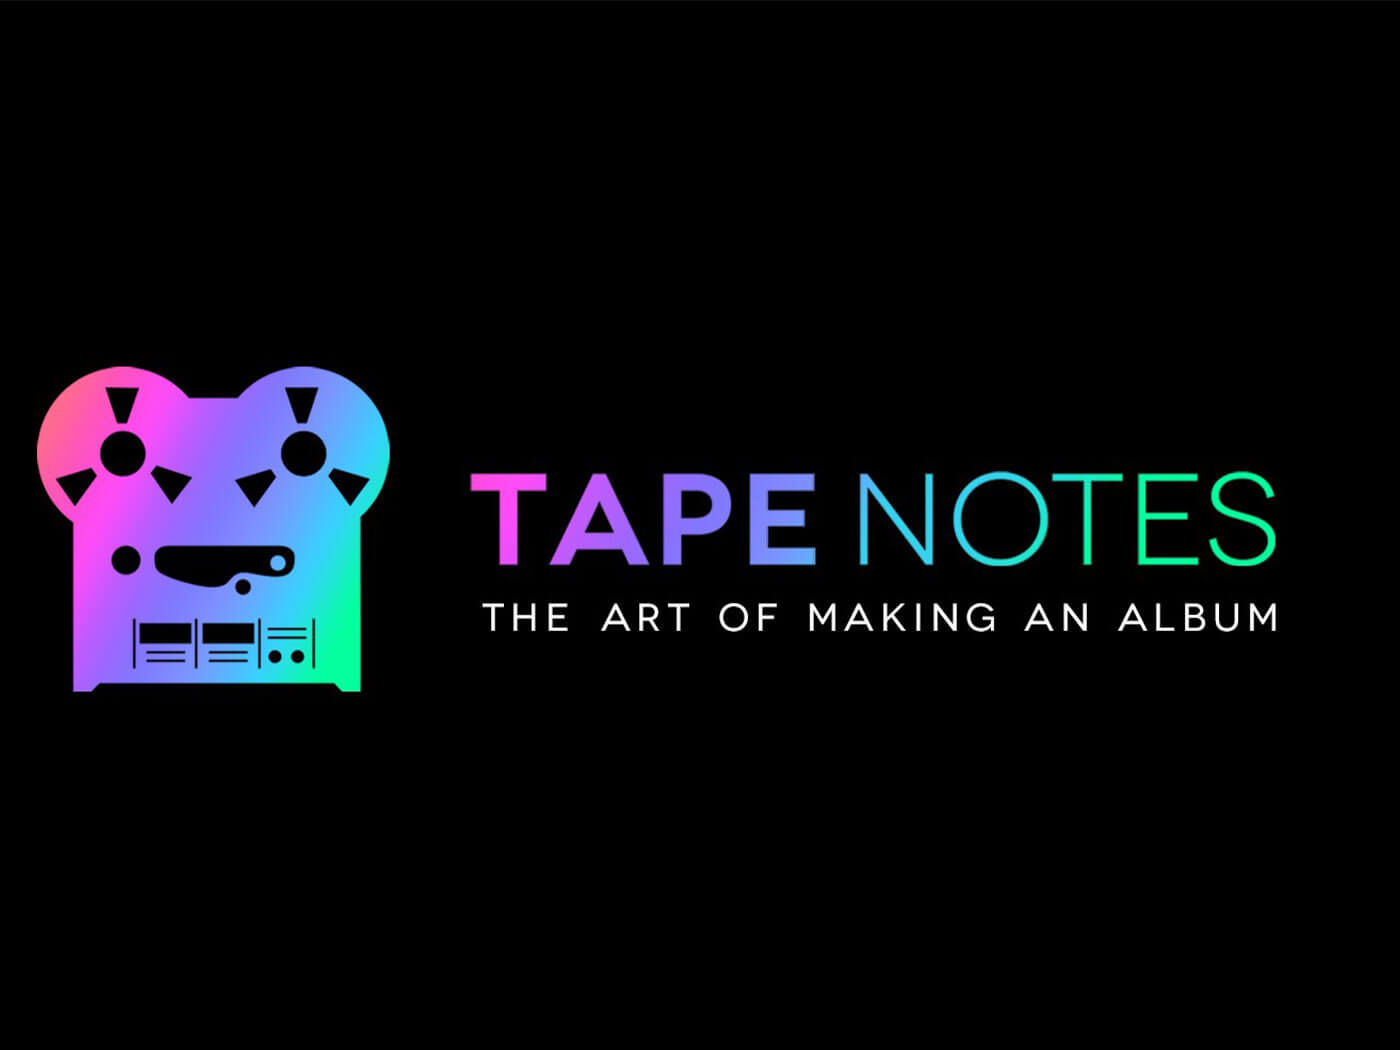 Tape Notes